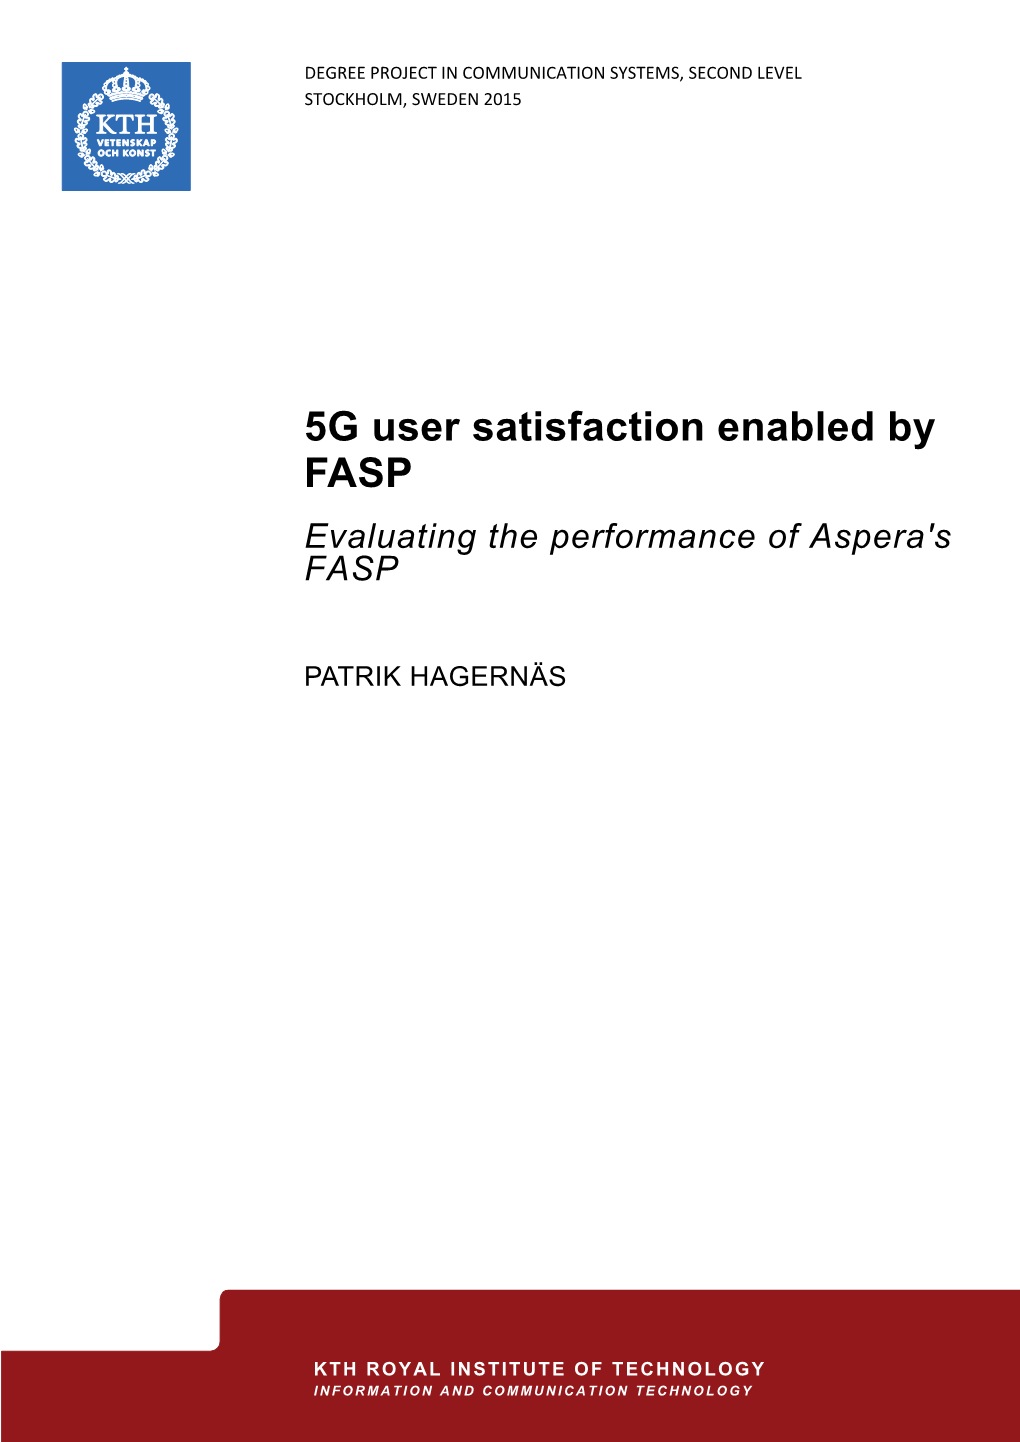 5G User Satisfaction Enabled by FASP Evaluating the Performance of Aspera's FASP